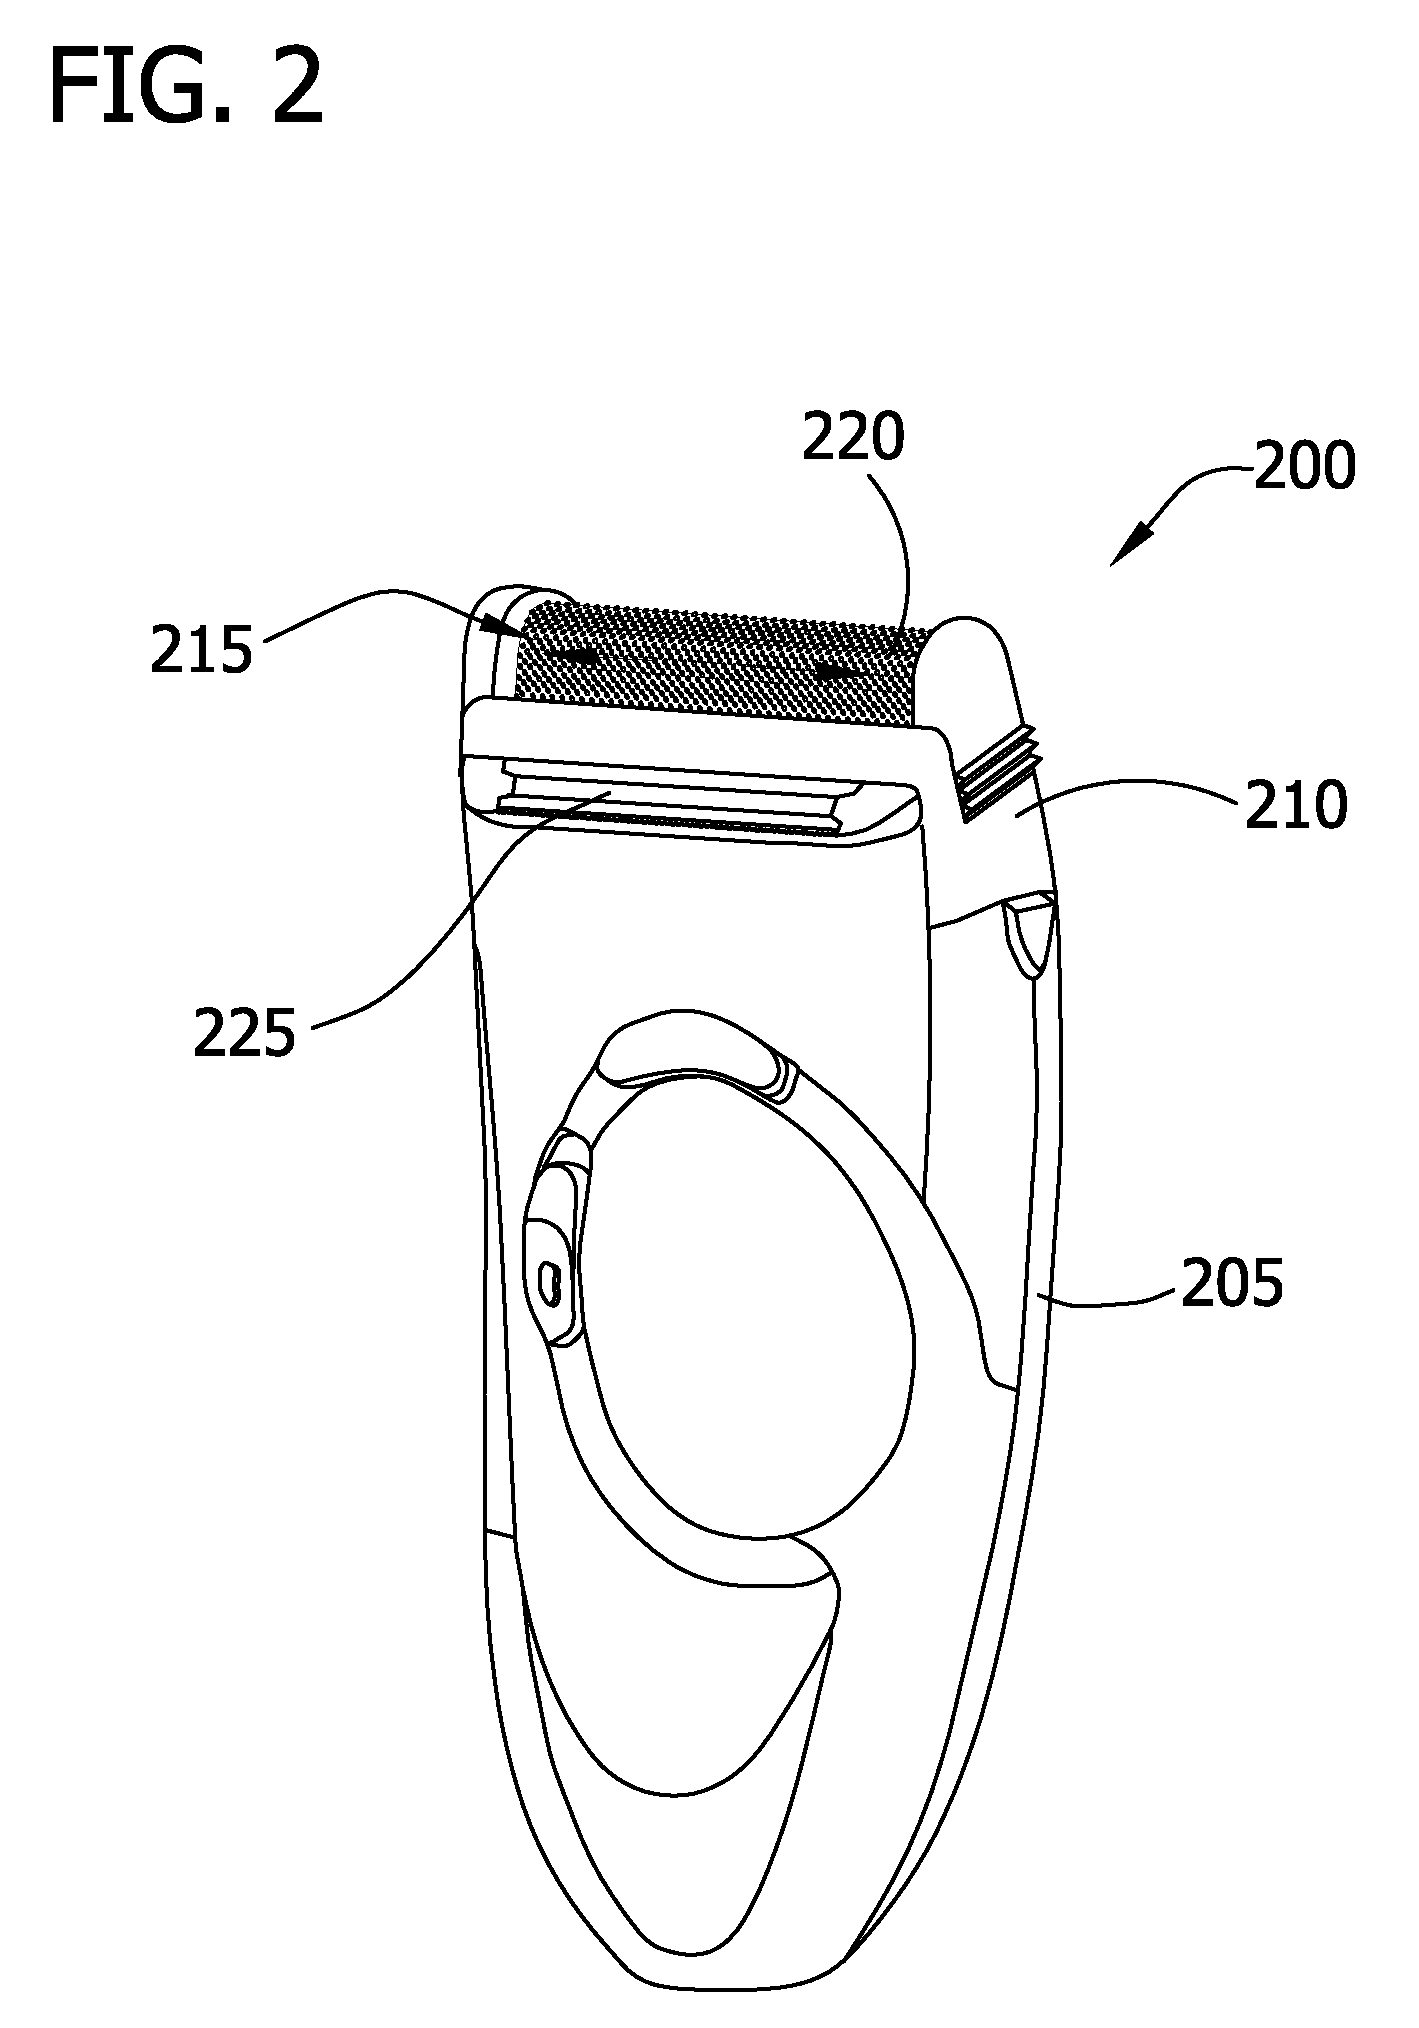 Personal grooming device having a tarnish resistant, hypoallergenic and/or antimicrobial silver alloy coating thereon